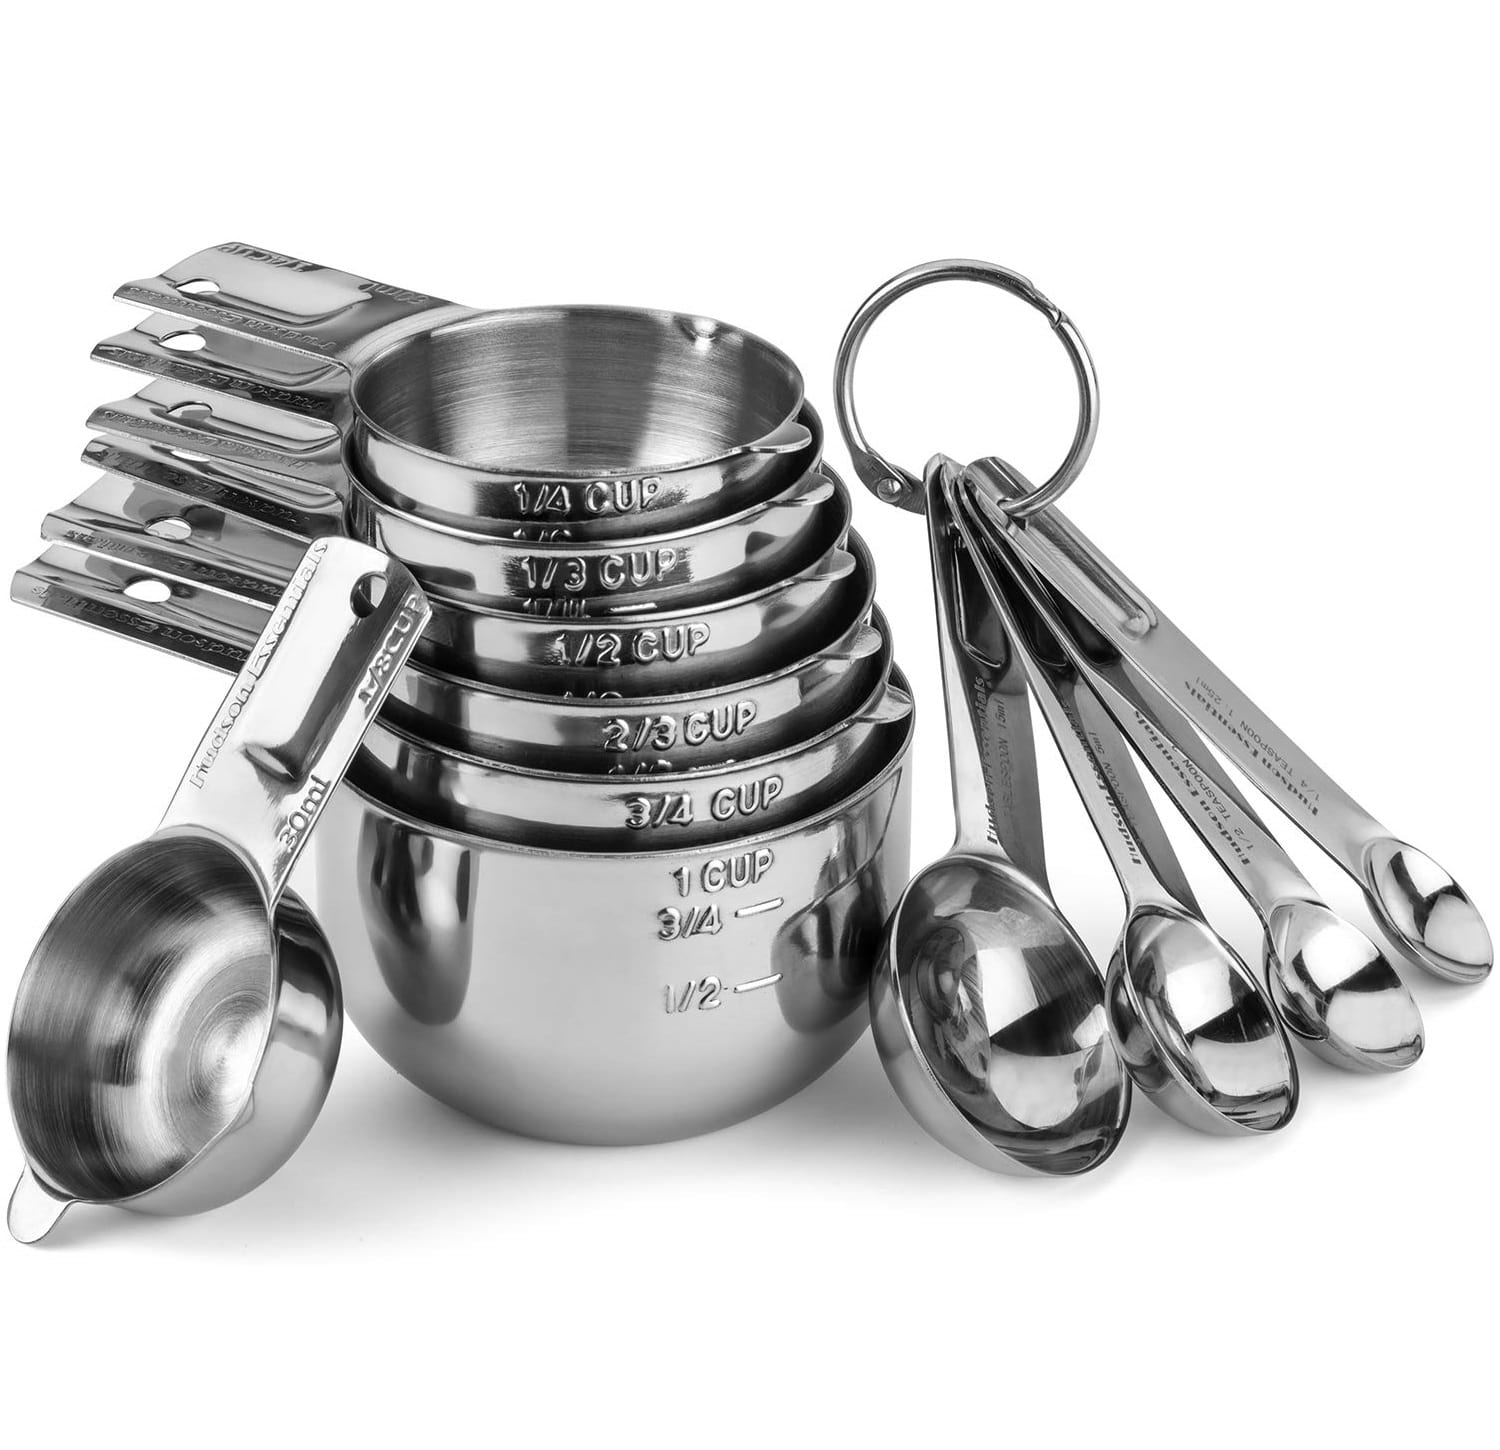 TILUCK Stainless Steel Measuring Cups & Spoons Set, Cups Kitchen